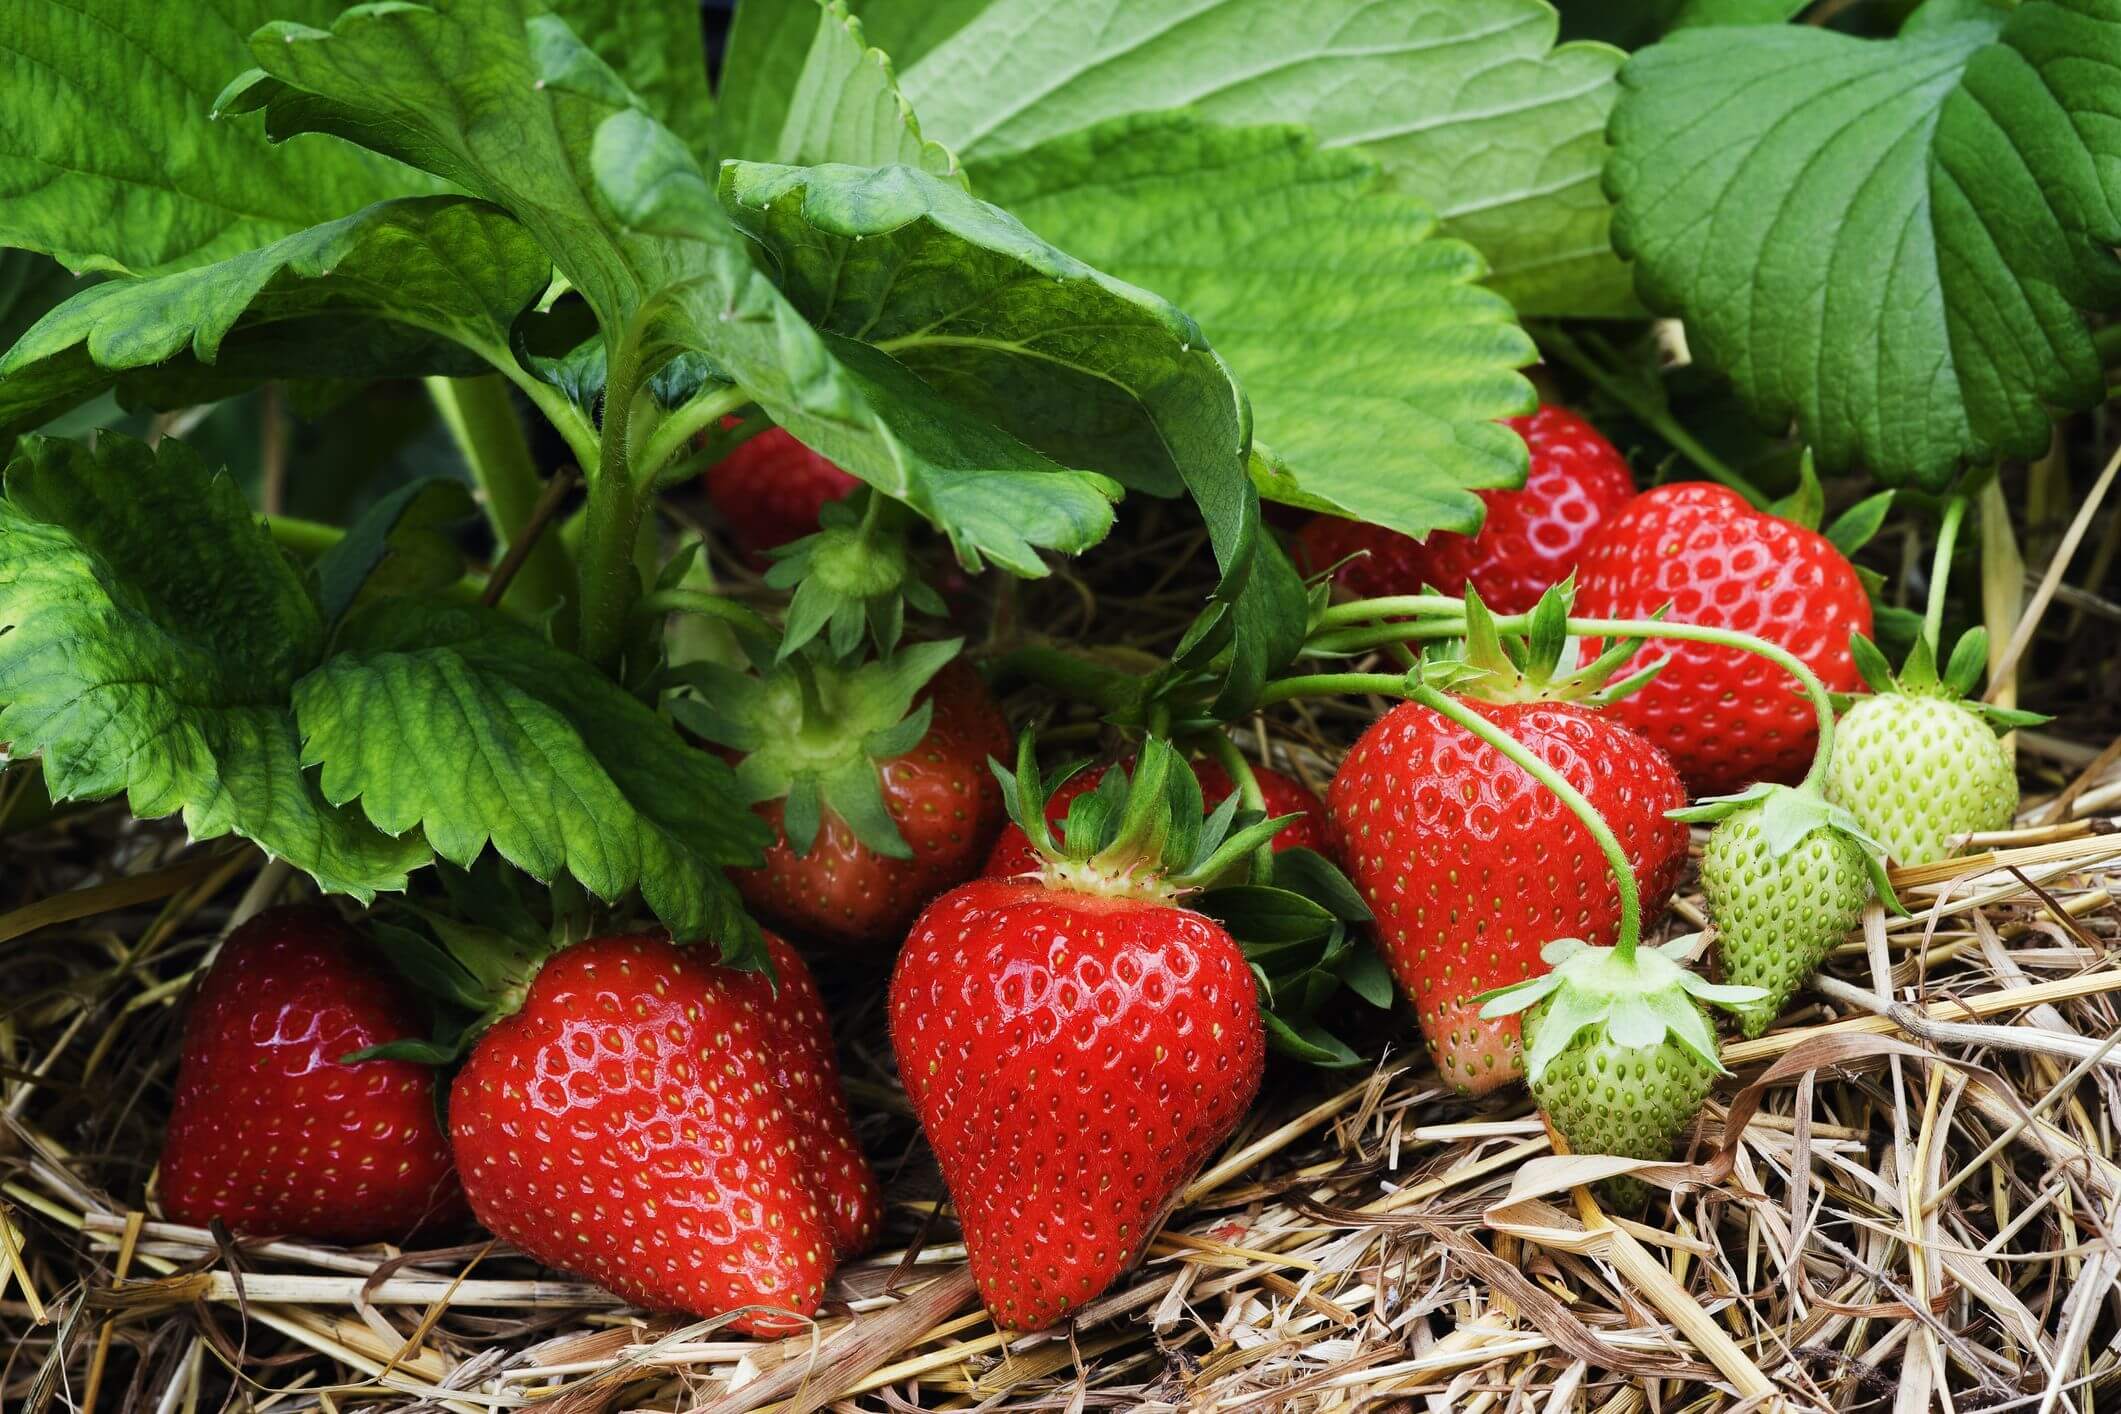 10 tips for growing strawberries - plant instructions